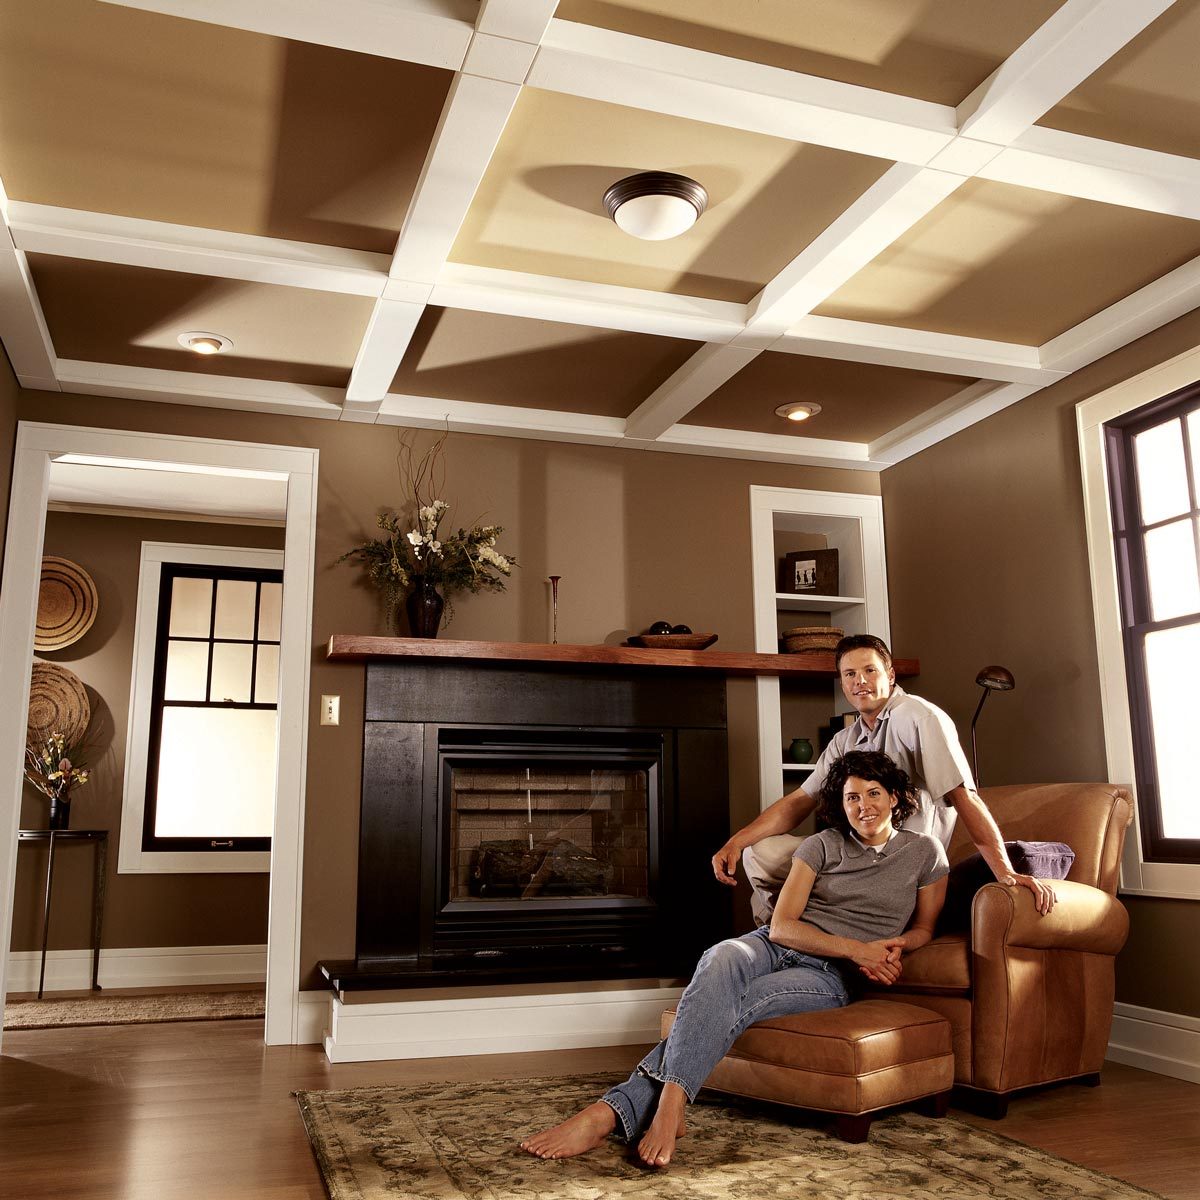 Ceiling Panels: How to Install a Beam and Panel Ceiling